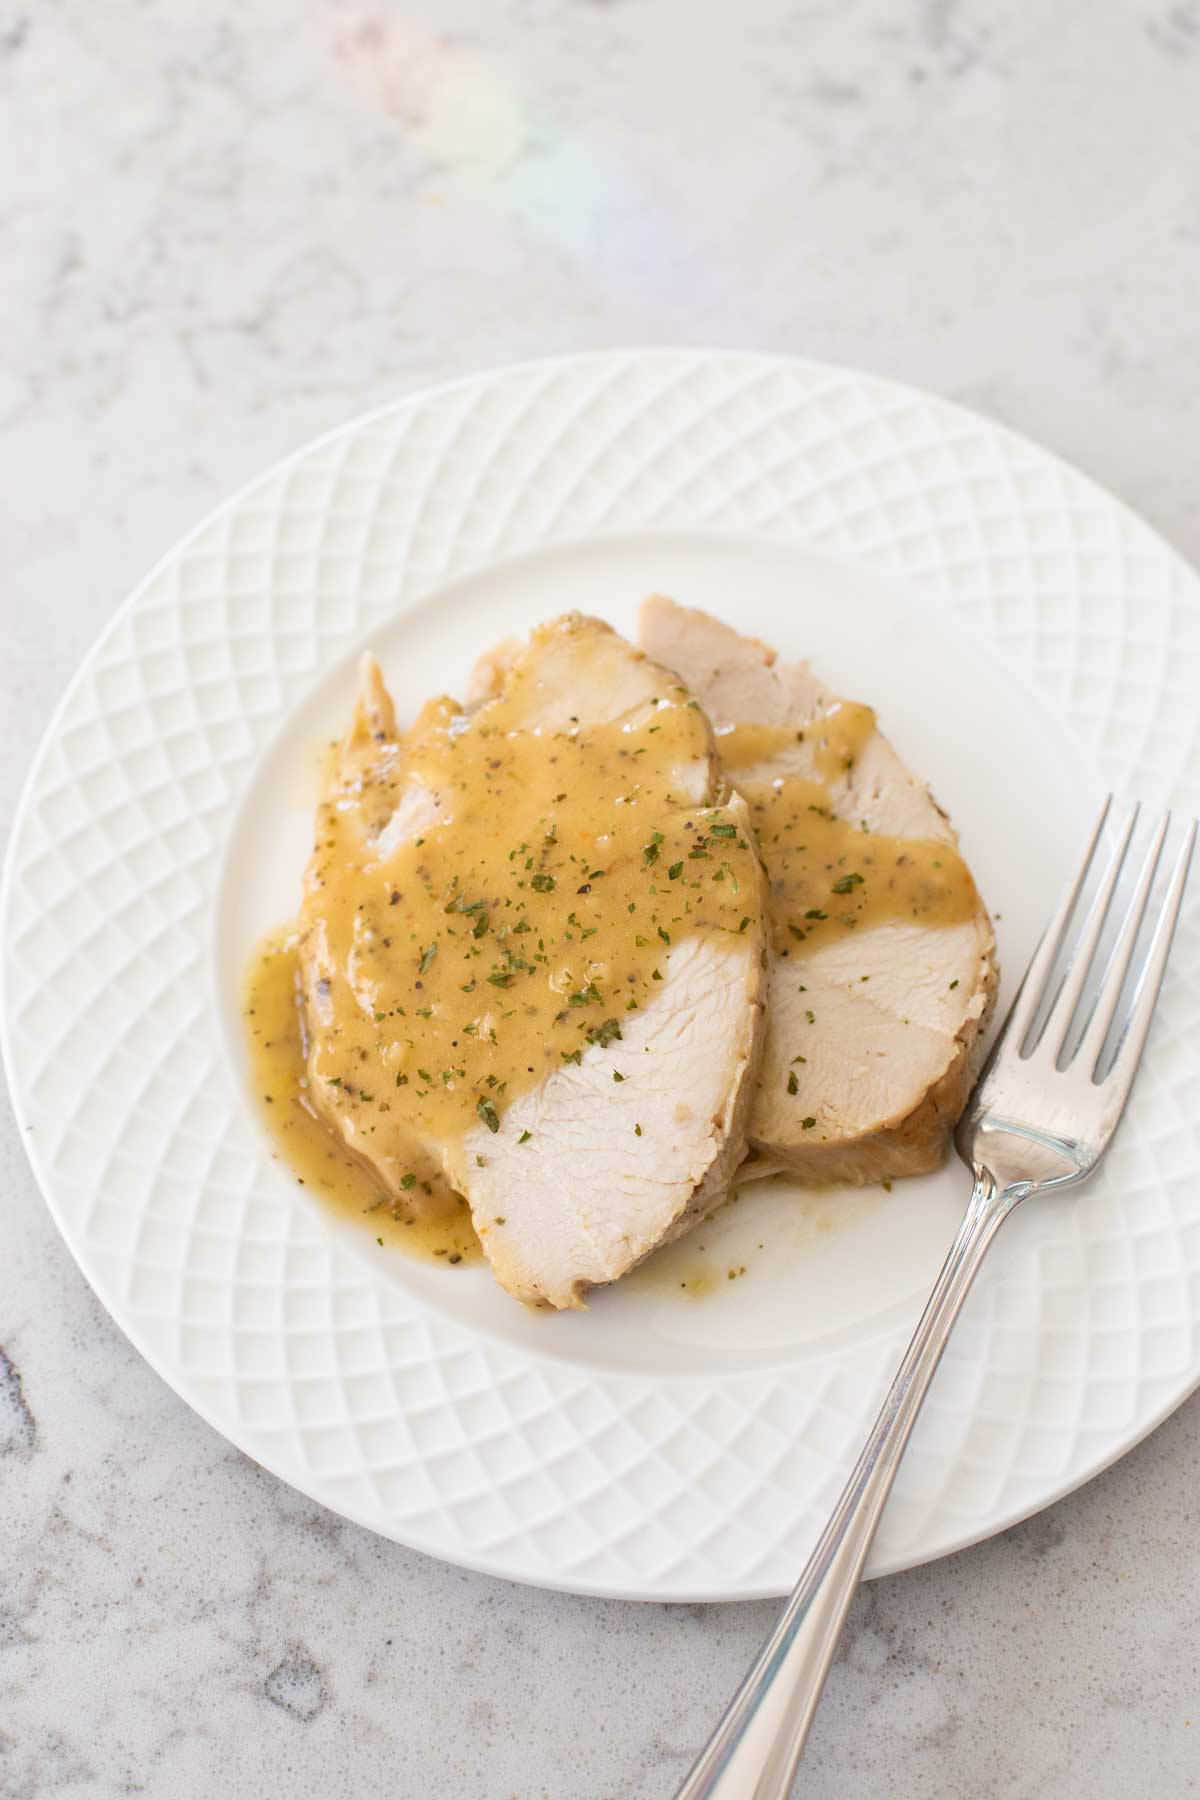 A serving of the slowcooked turkey breast drizzled with pan gravy.